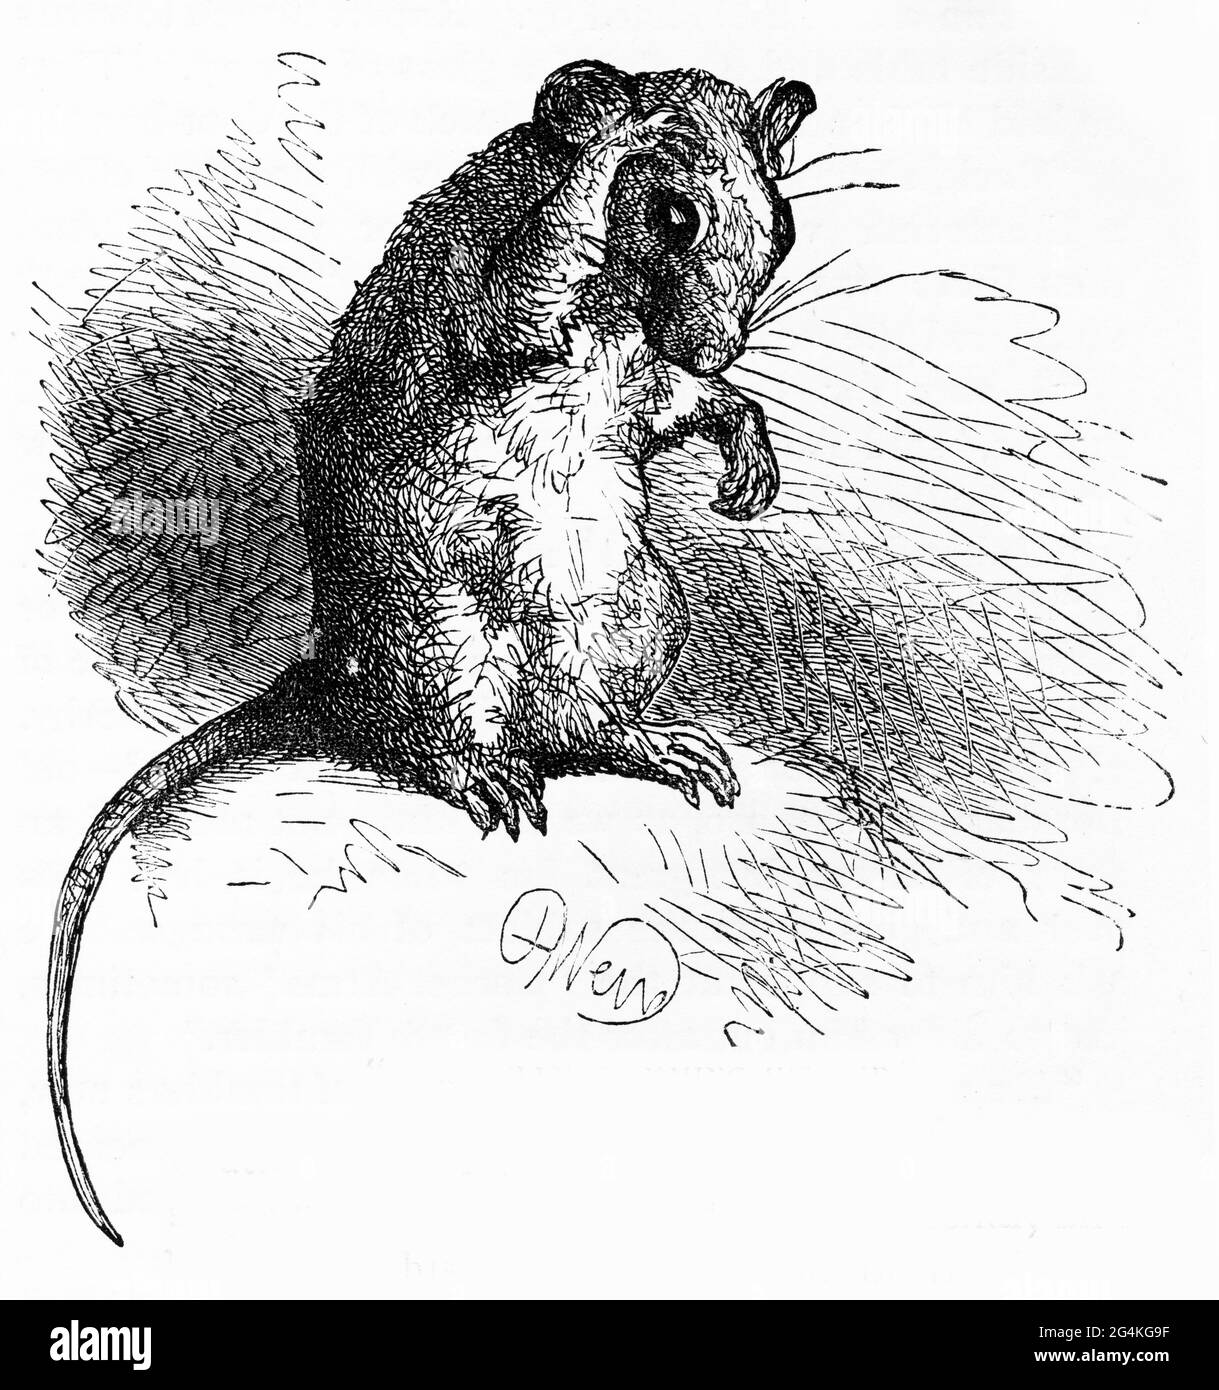 Engraving of a rat cleaning itself Stock Photo